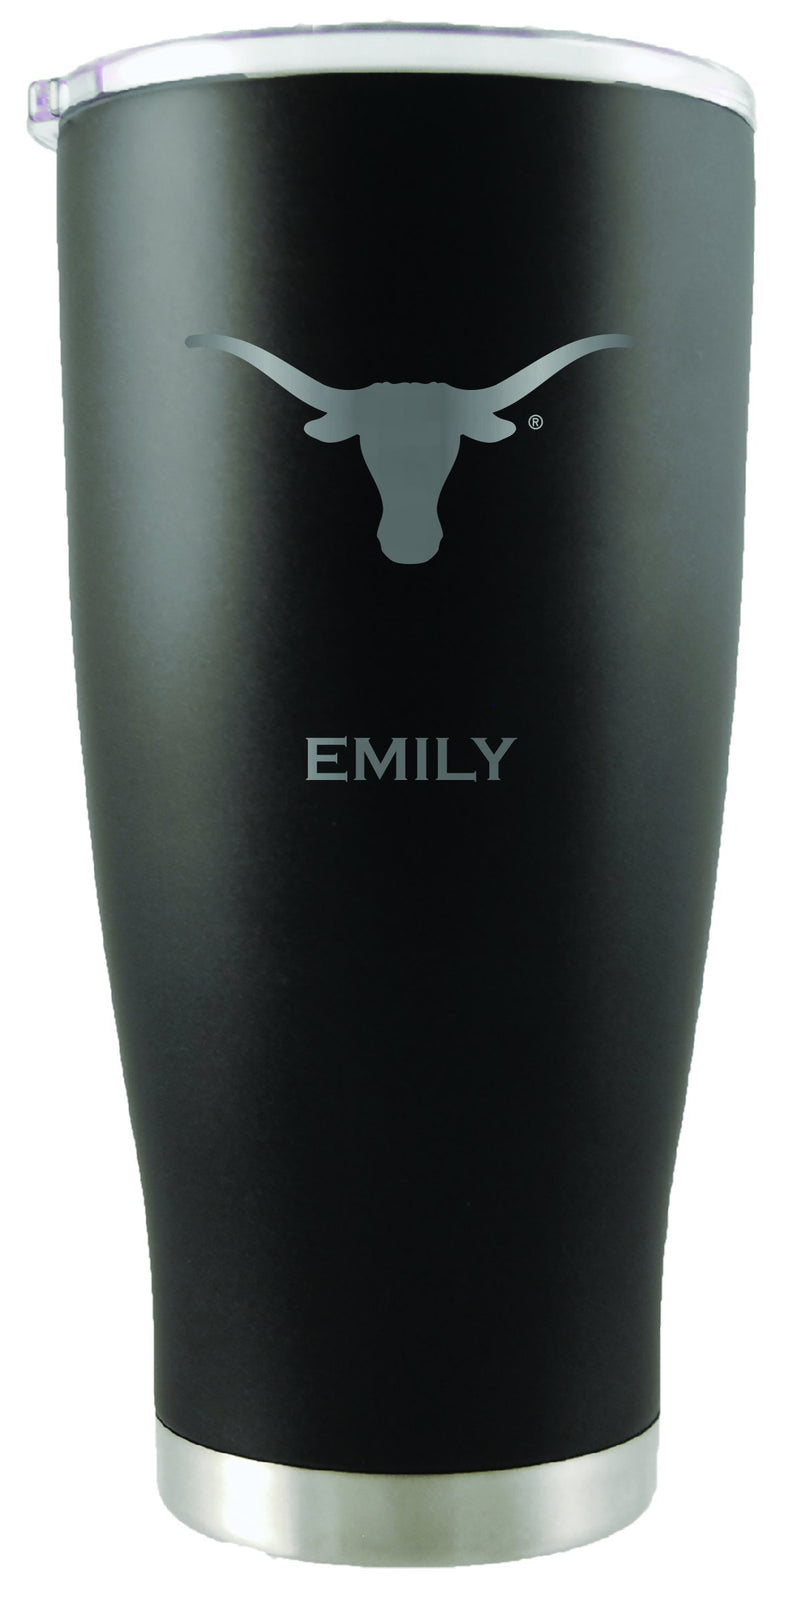 20oz Black Personalized Stainless Steel Tumbler | Texas at Austin, University
COL, CurrentProduct, Drinkware_category_All, Personalized_Personalized, TEX, Texas Longhorns
The Memory Company